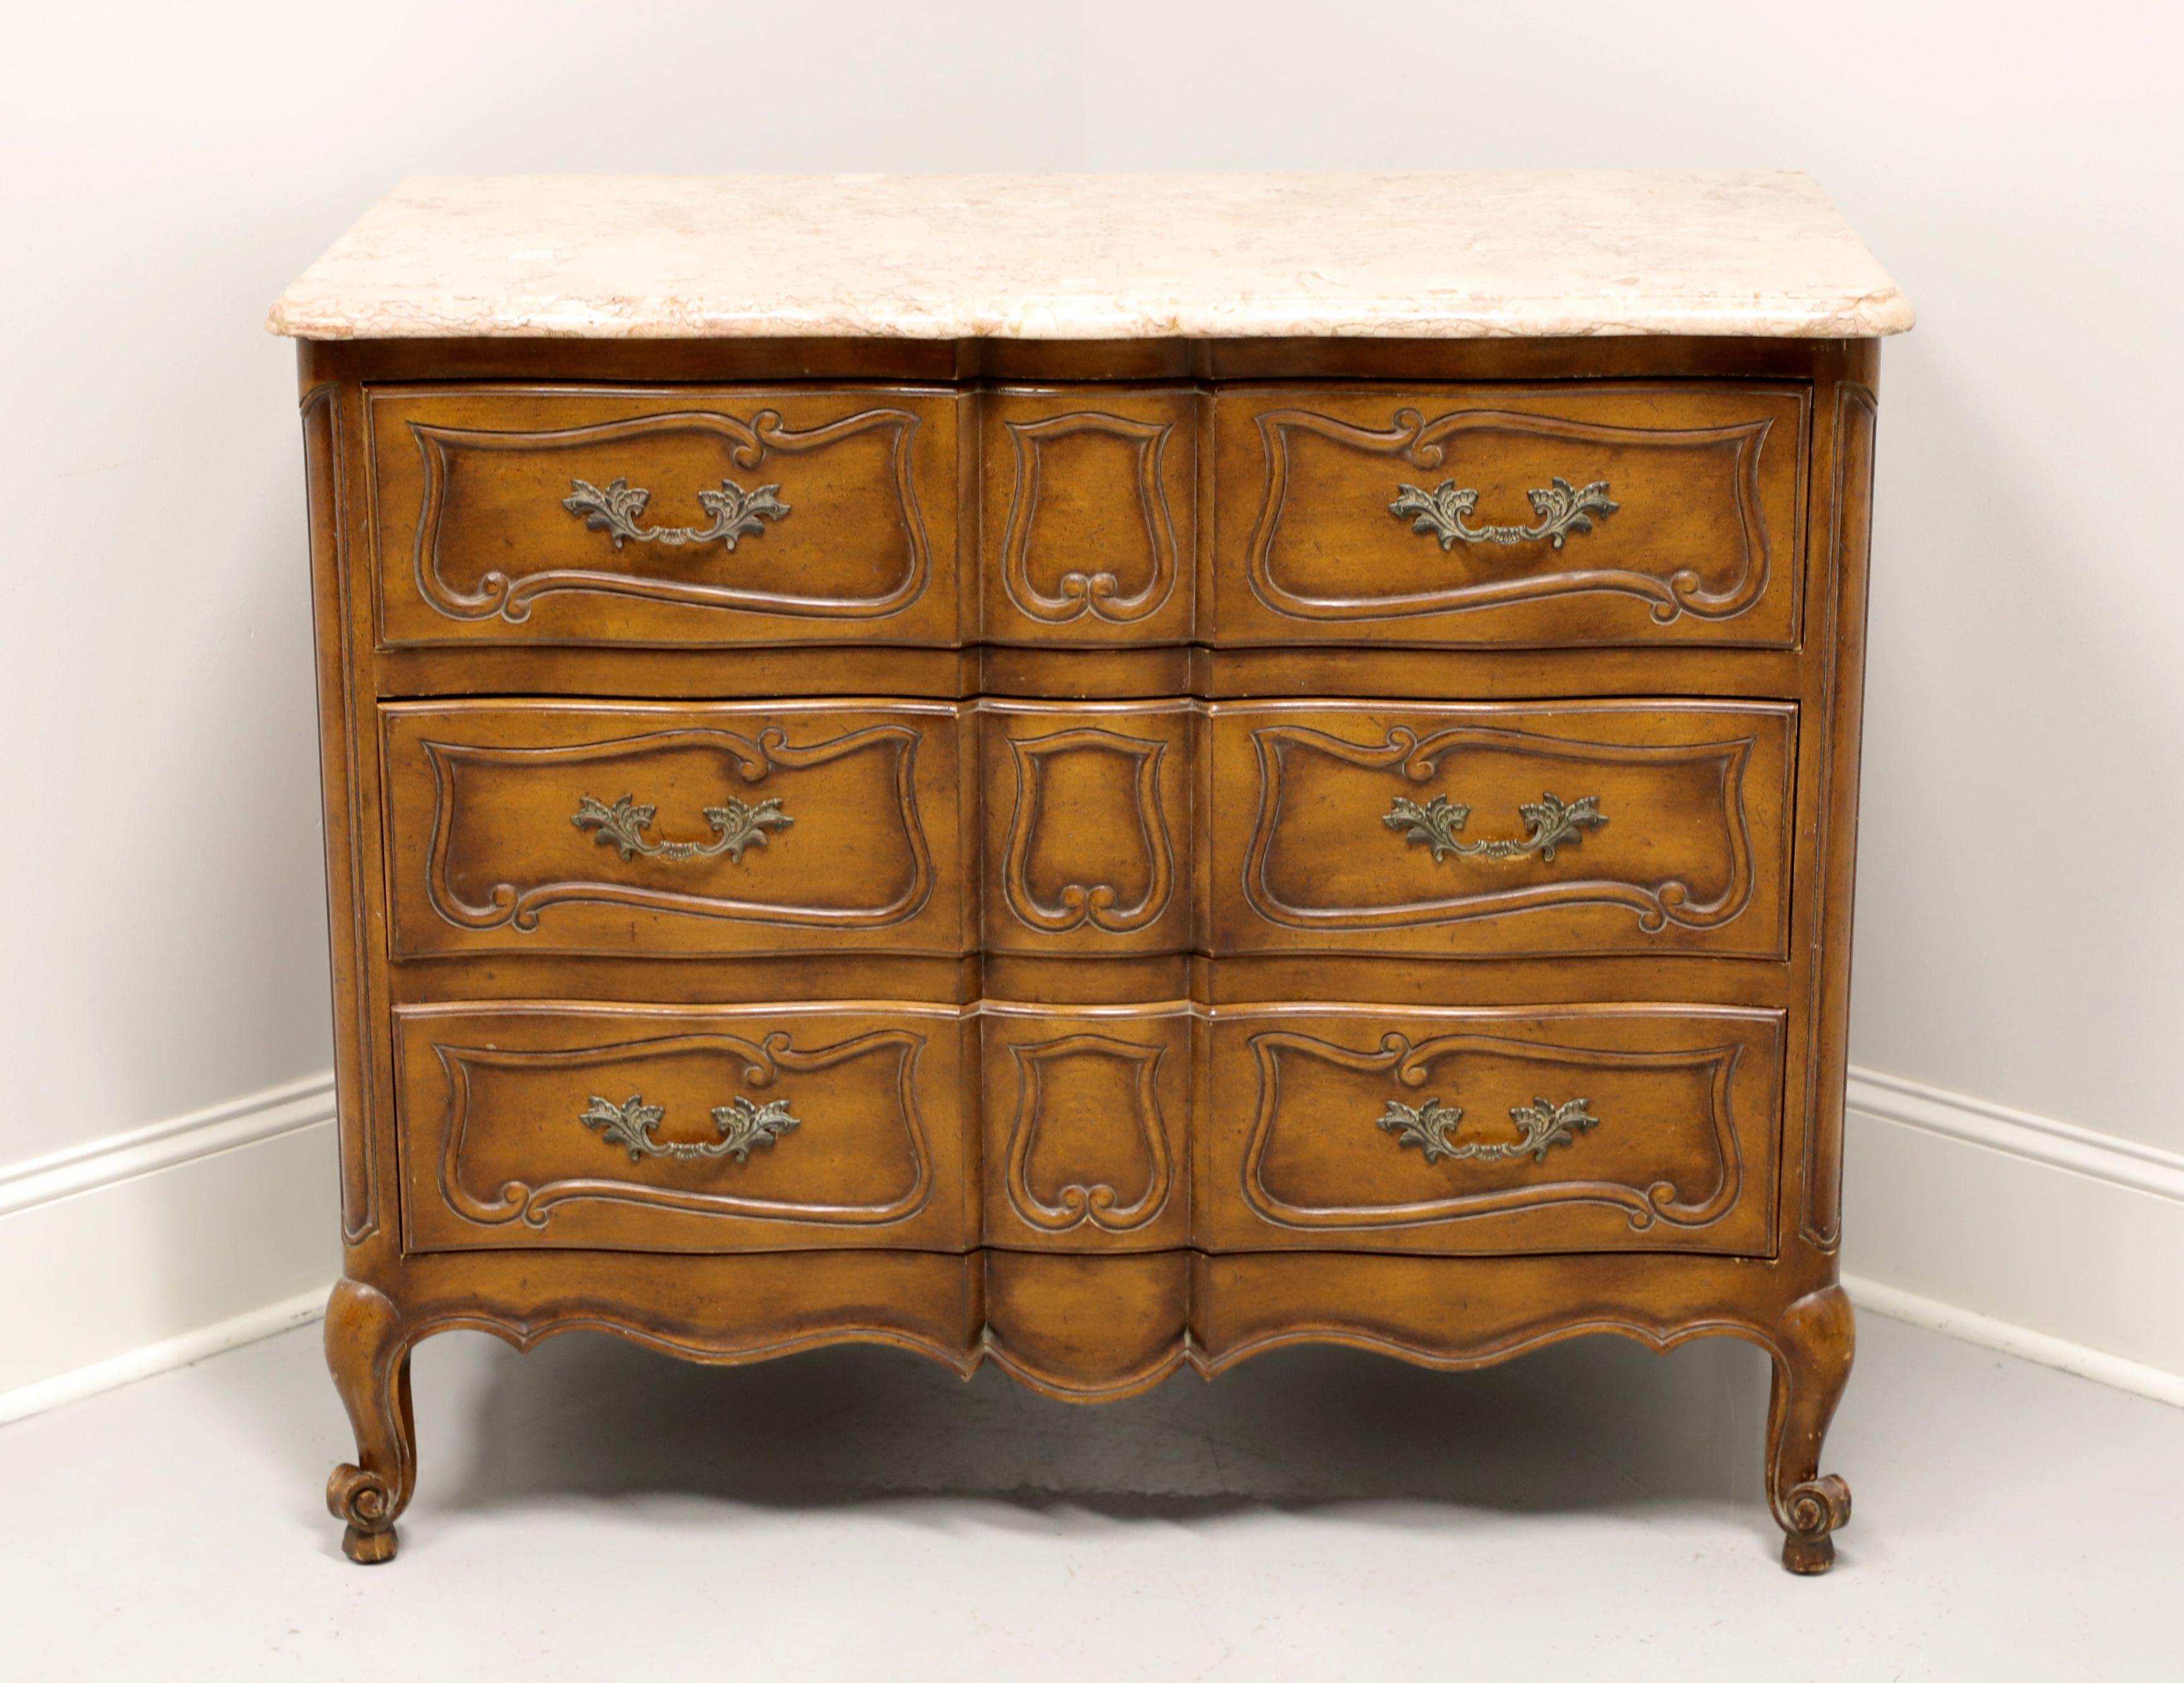 A French Country style bachelor chest, unbranded, similar quality to Thomasville or White Furniture. Fruitwood with antique brass hardware, marble top, carved drawer fronts, carved apron and scroll feet. Features three drawers of dovetail